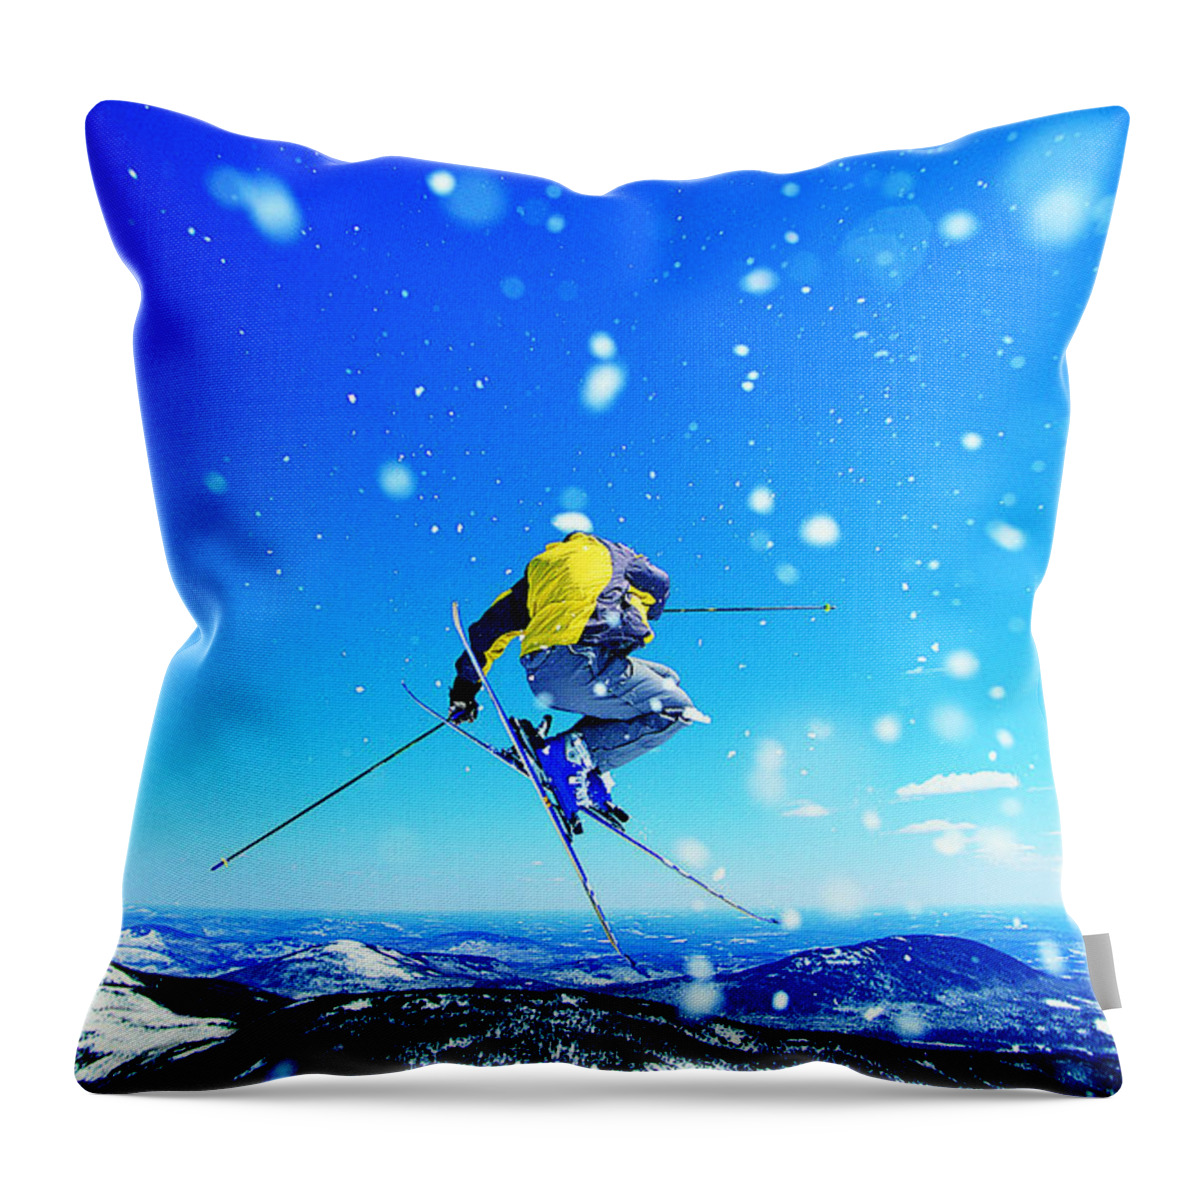 Skiing Throw Pillow featuring the photograph Man Skiing by Digital Vision.